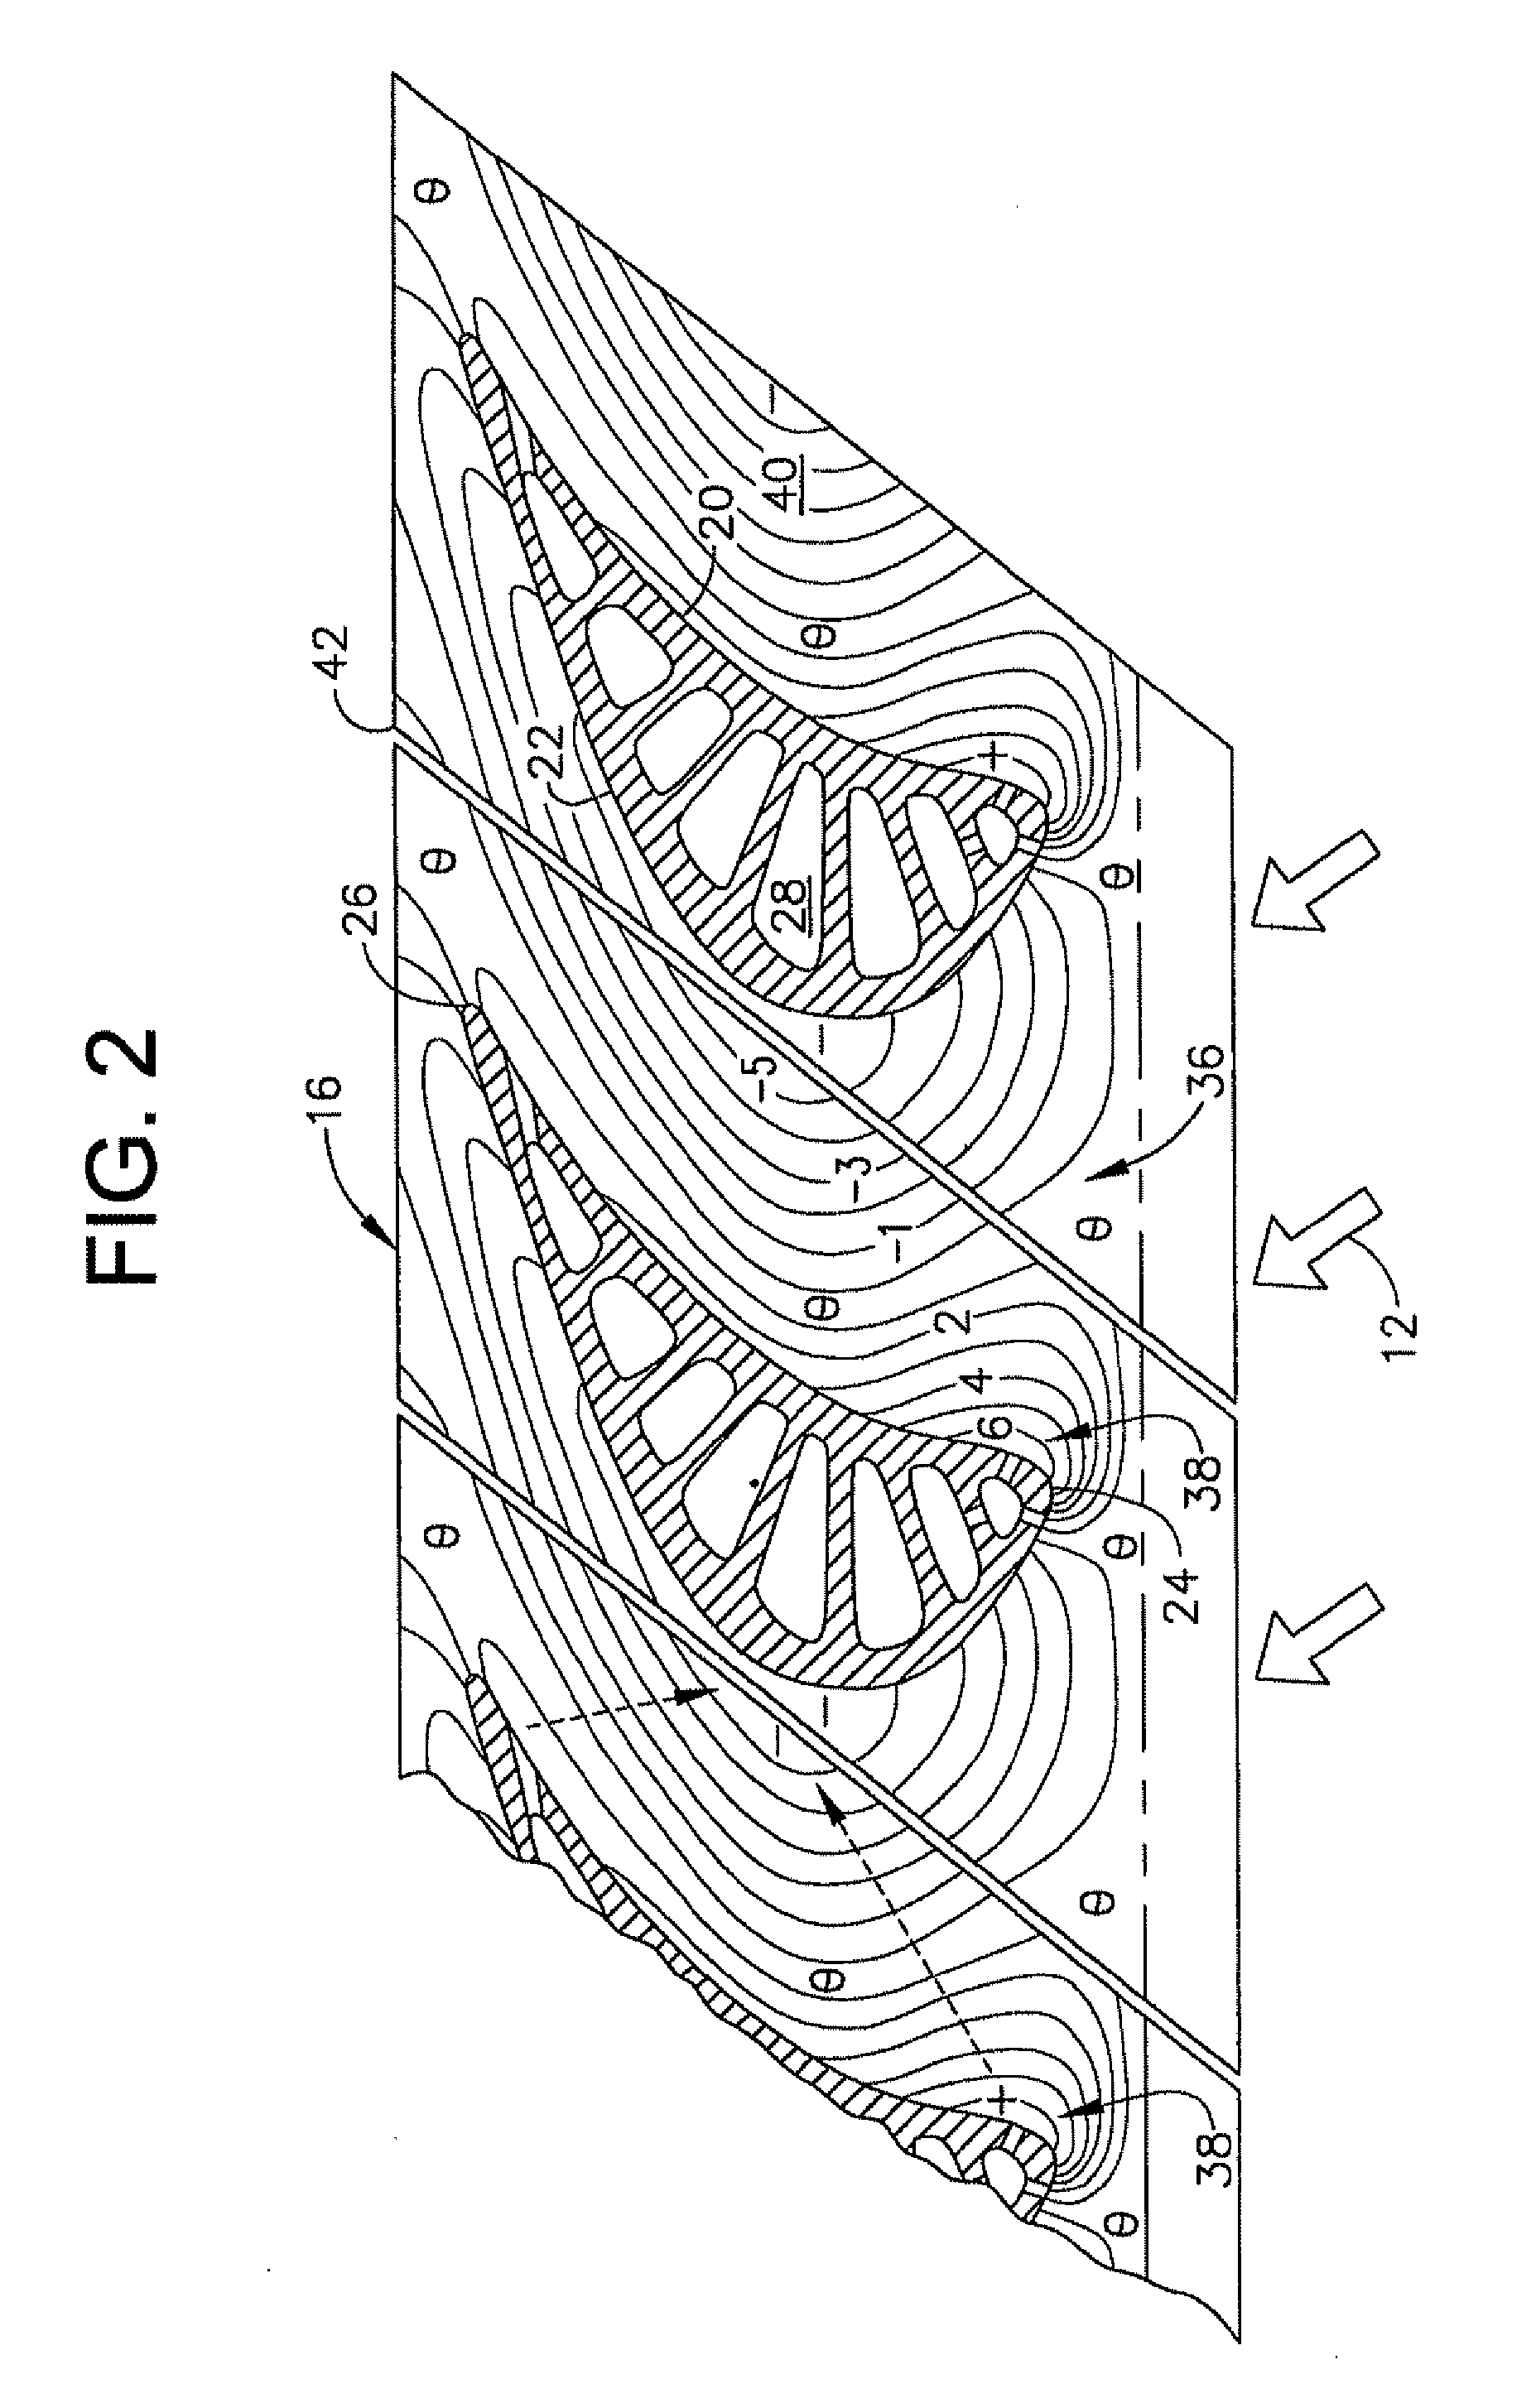 Scalloped surface turbine stage with trailing edge ridges